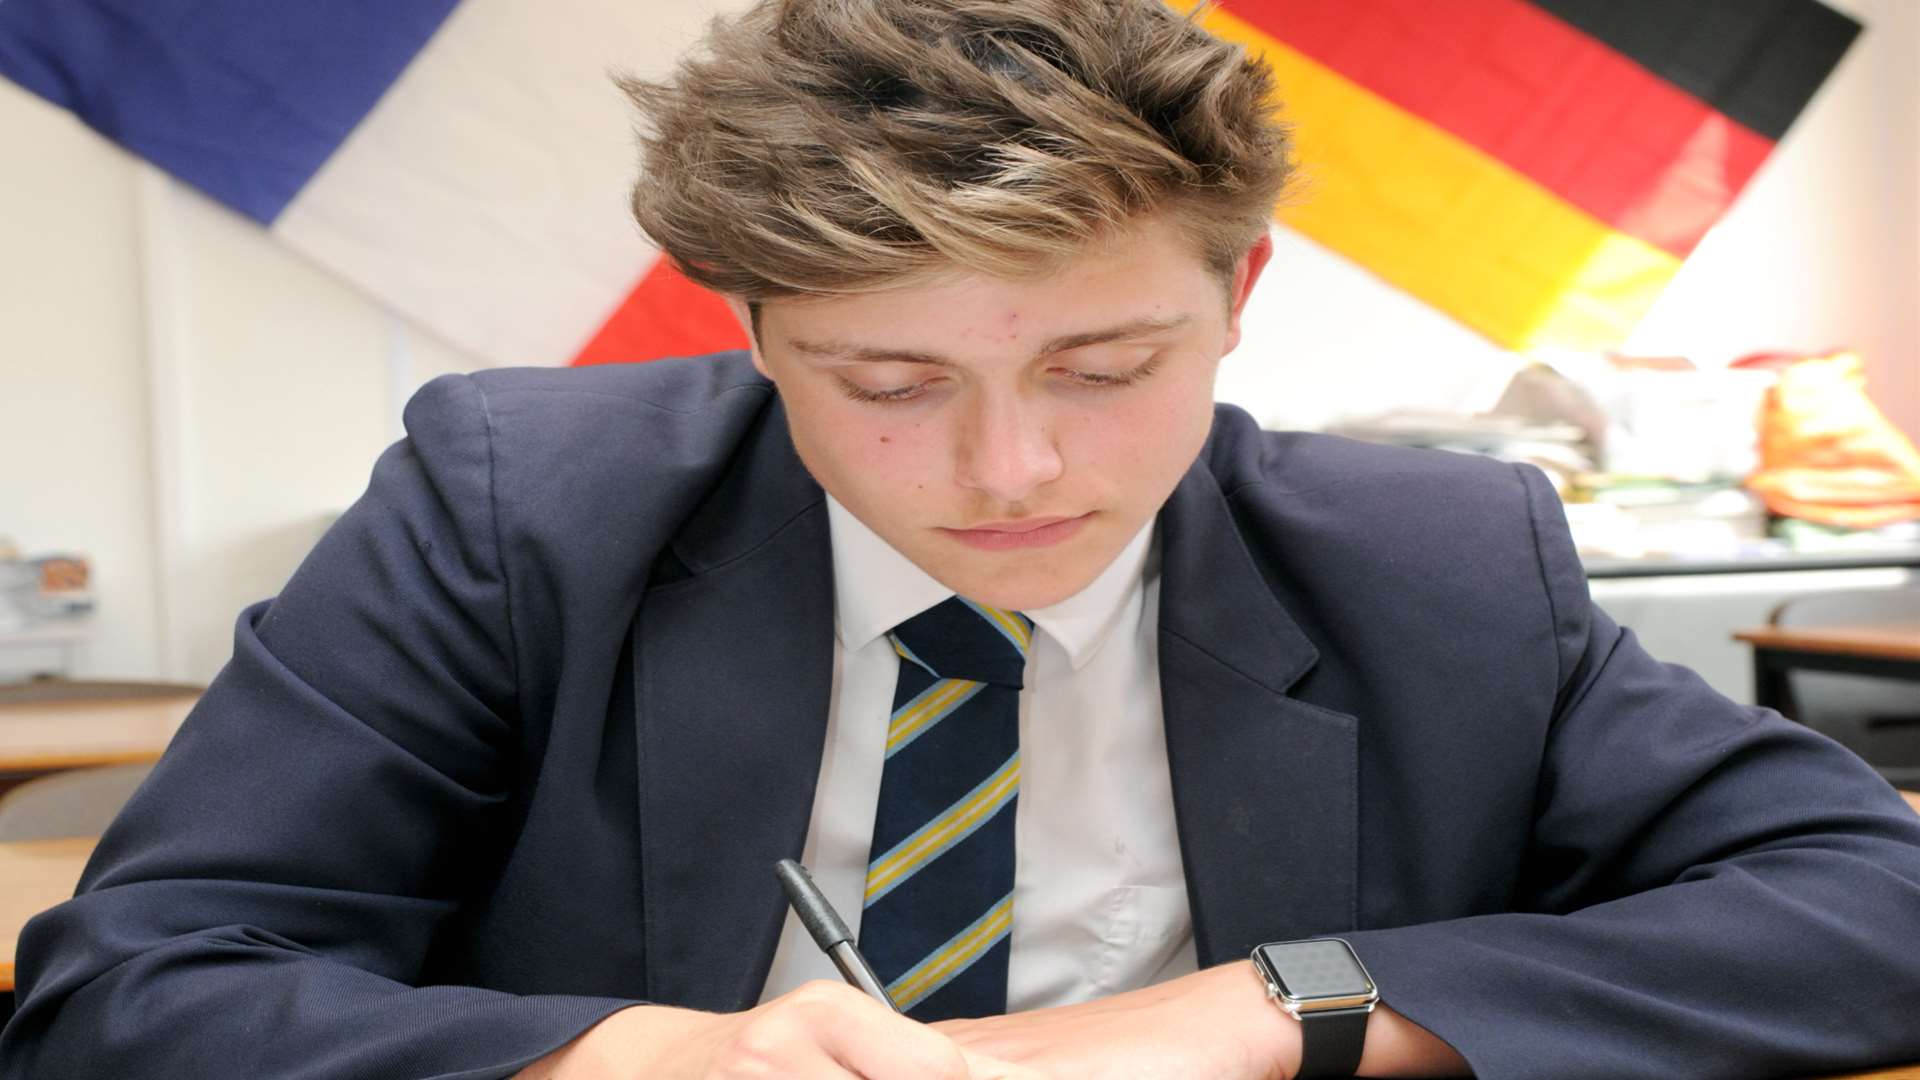 Charlie Jones, a Wilmington Grammar School for Boys pupil, will take his GCSEs next year as he enters Year 11